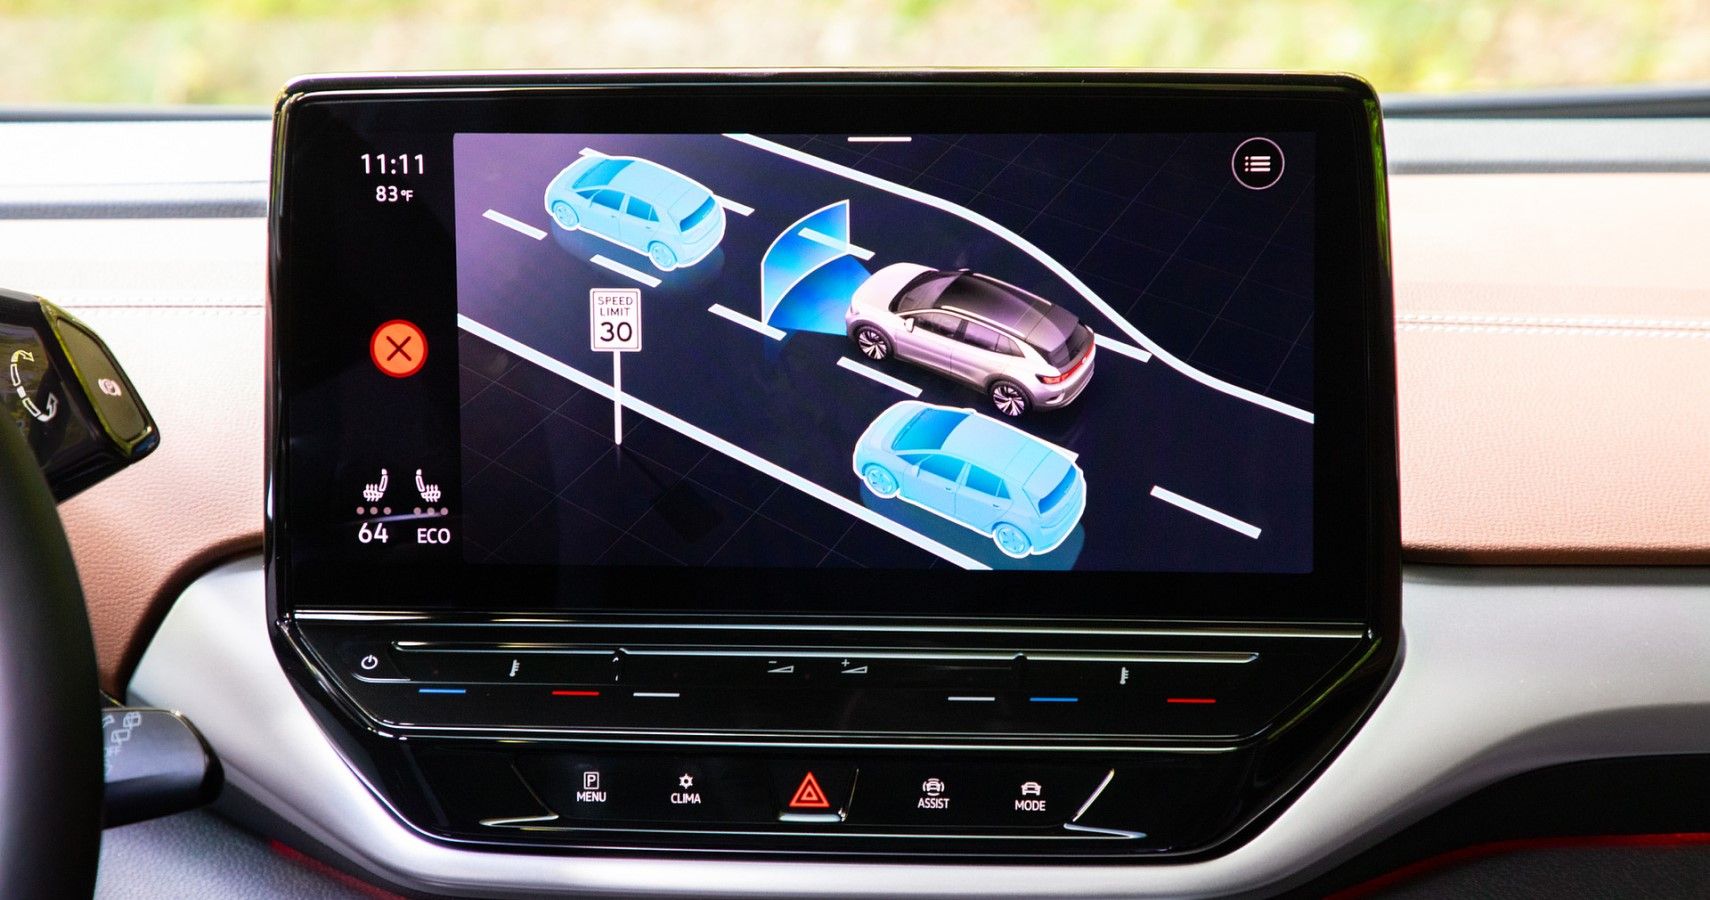 Volkswagen ID.4 showcasing its active safety feature on the infotainment screen